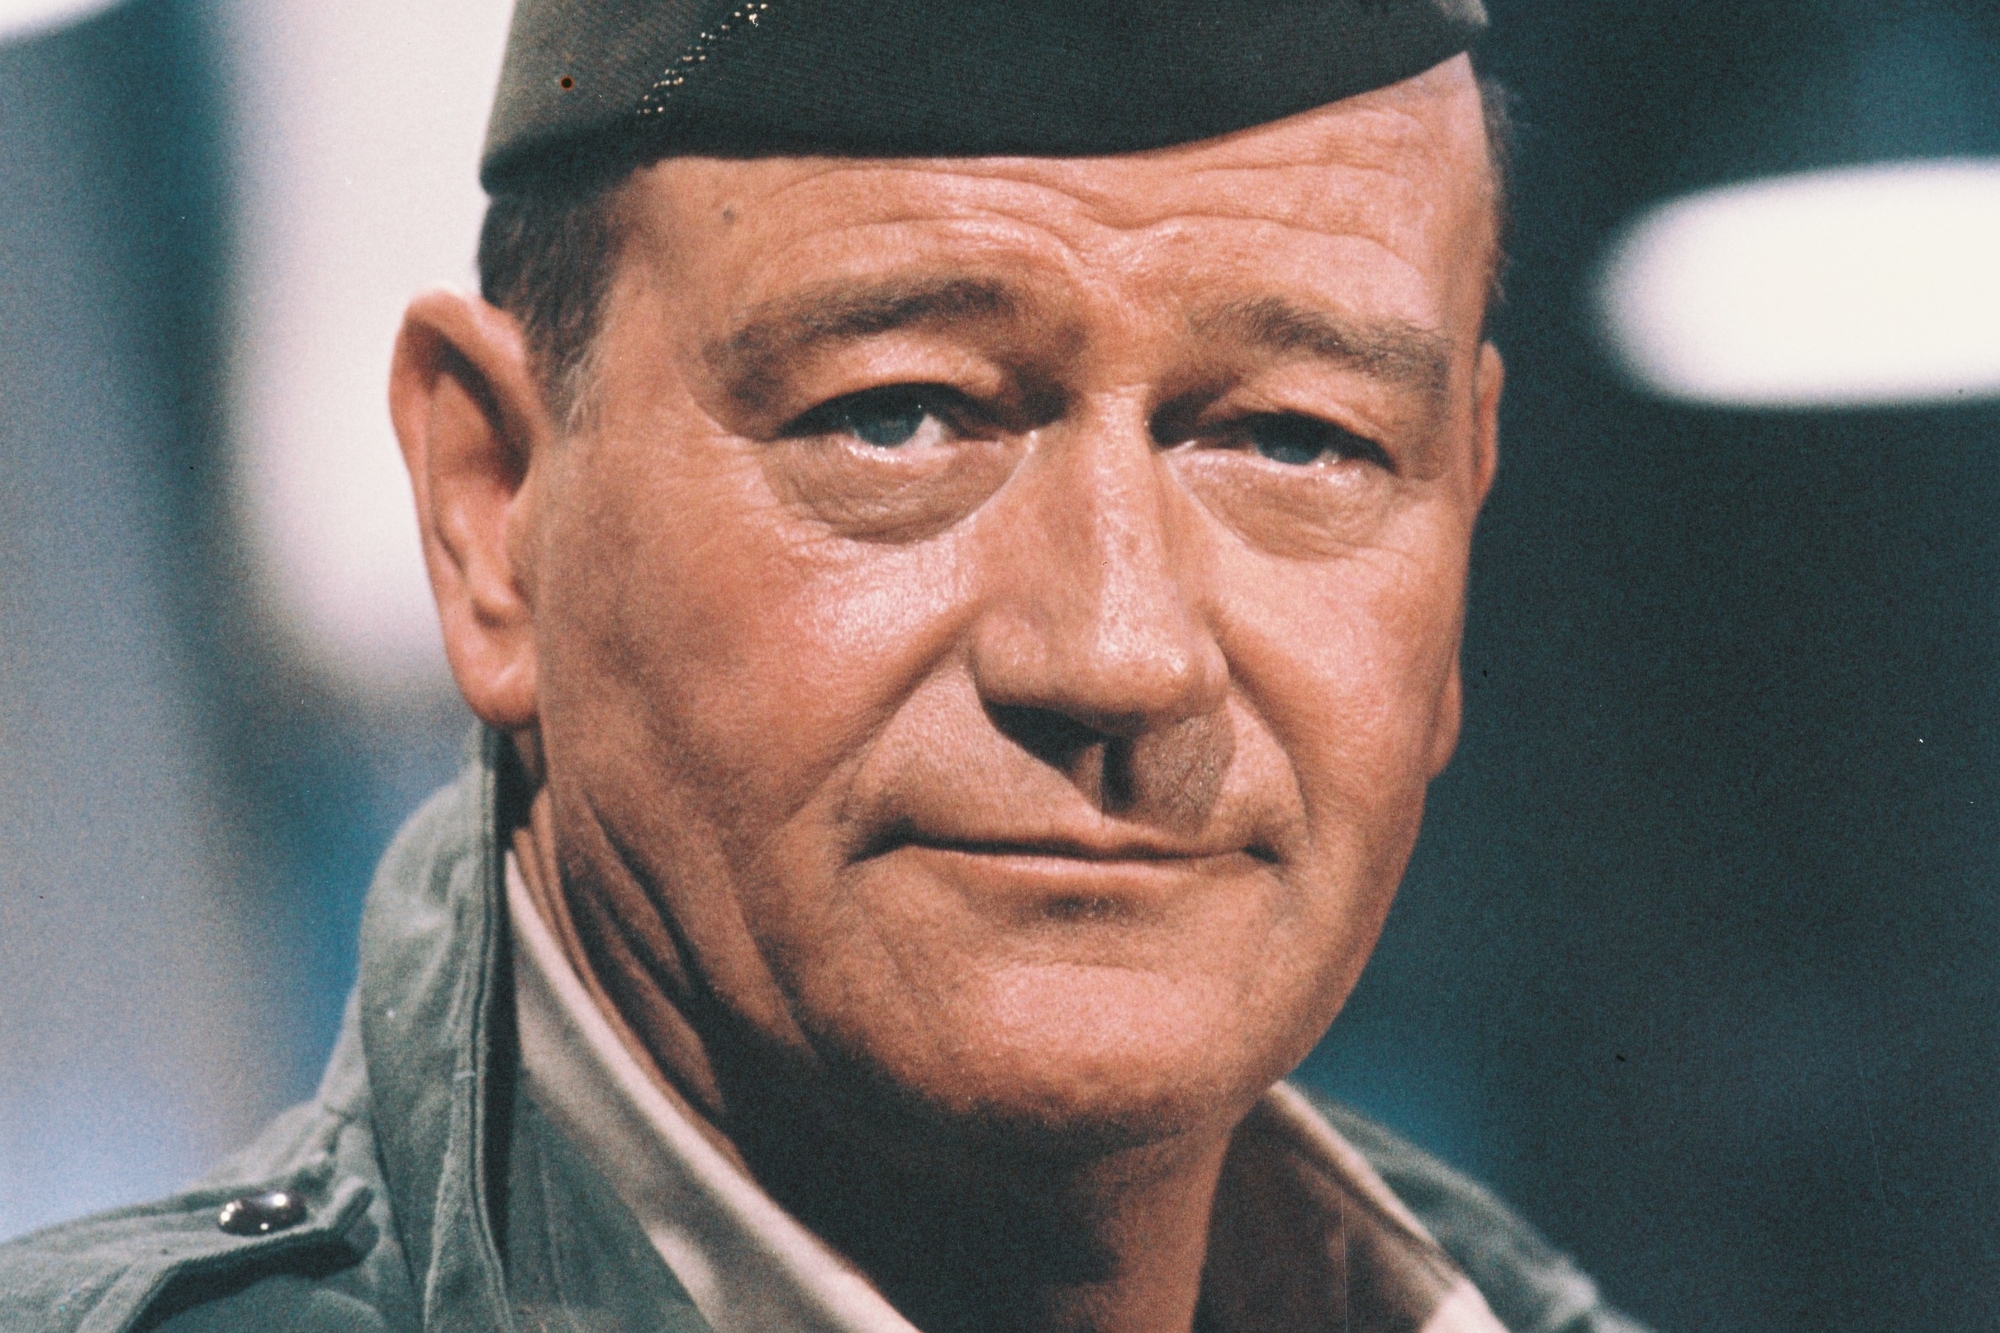 'The Longest Day' actor John Wayne playing hero Lieutenant Colonel Benjamin Vandervoort with a plain expression, wearing a uniform